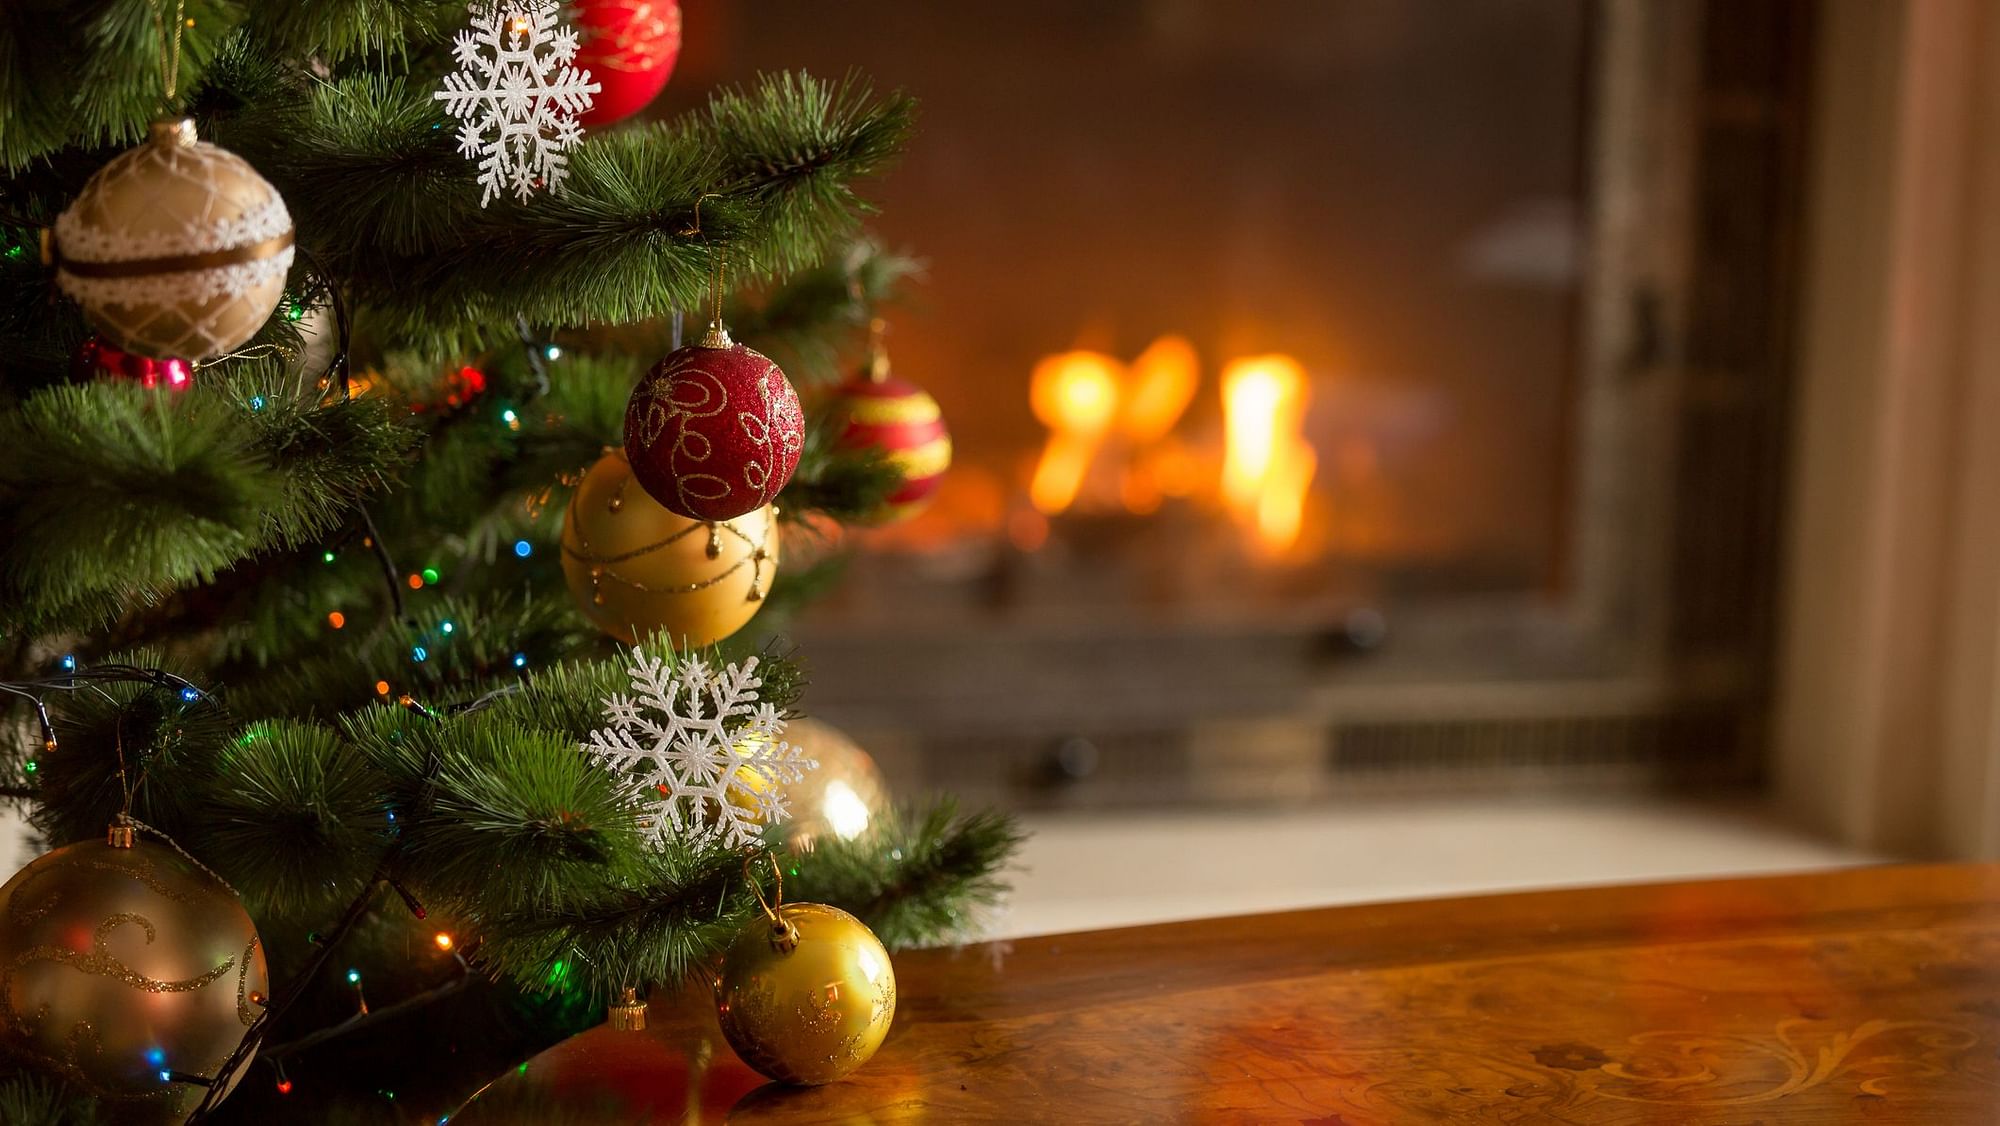 Christmas and Midsummer holidays were associated with 15 per cent and 12 per cent of higher risk of heart attack respectively.